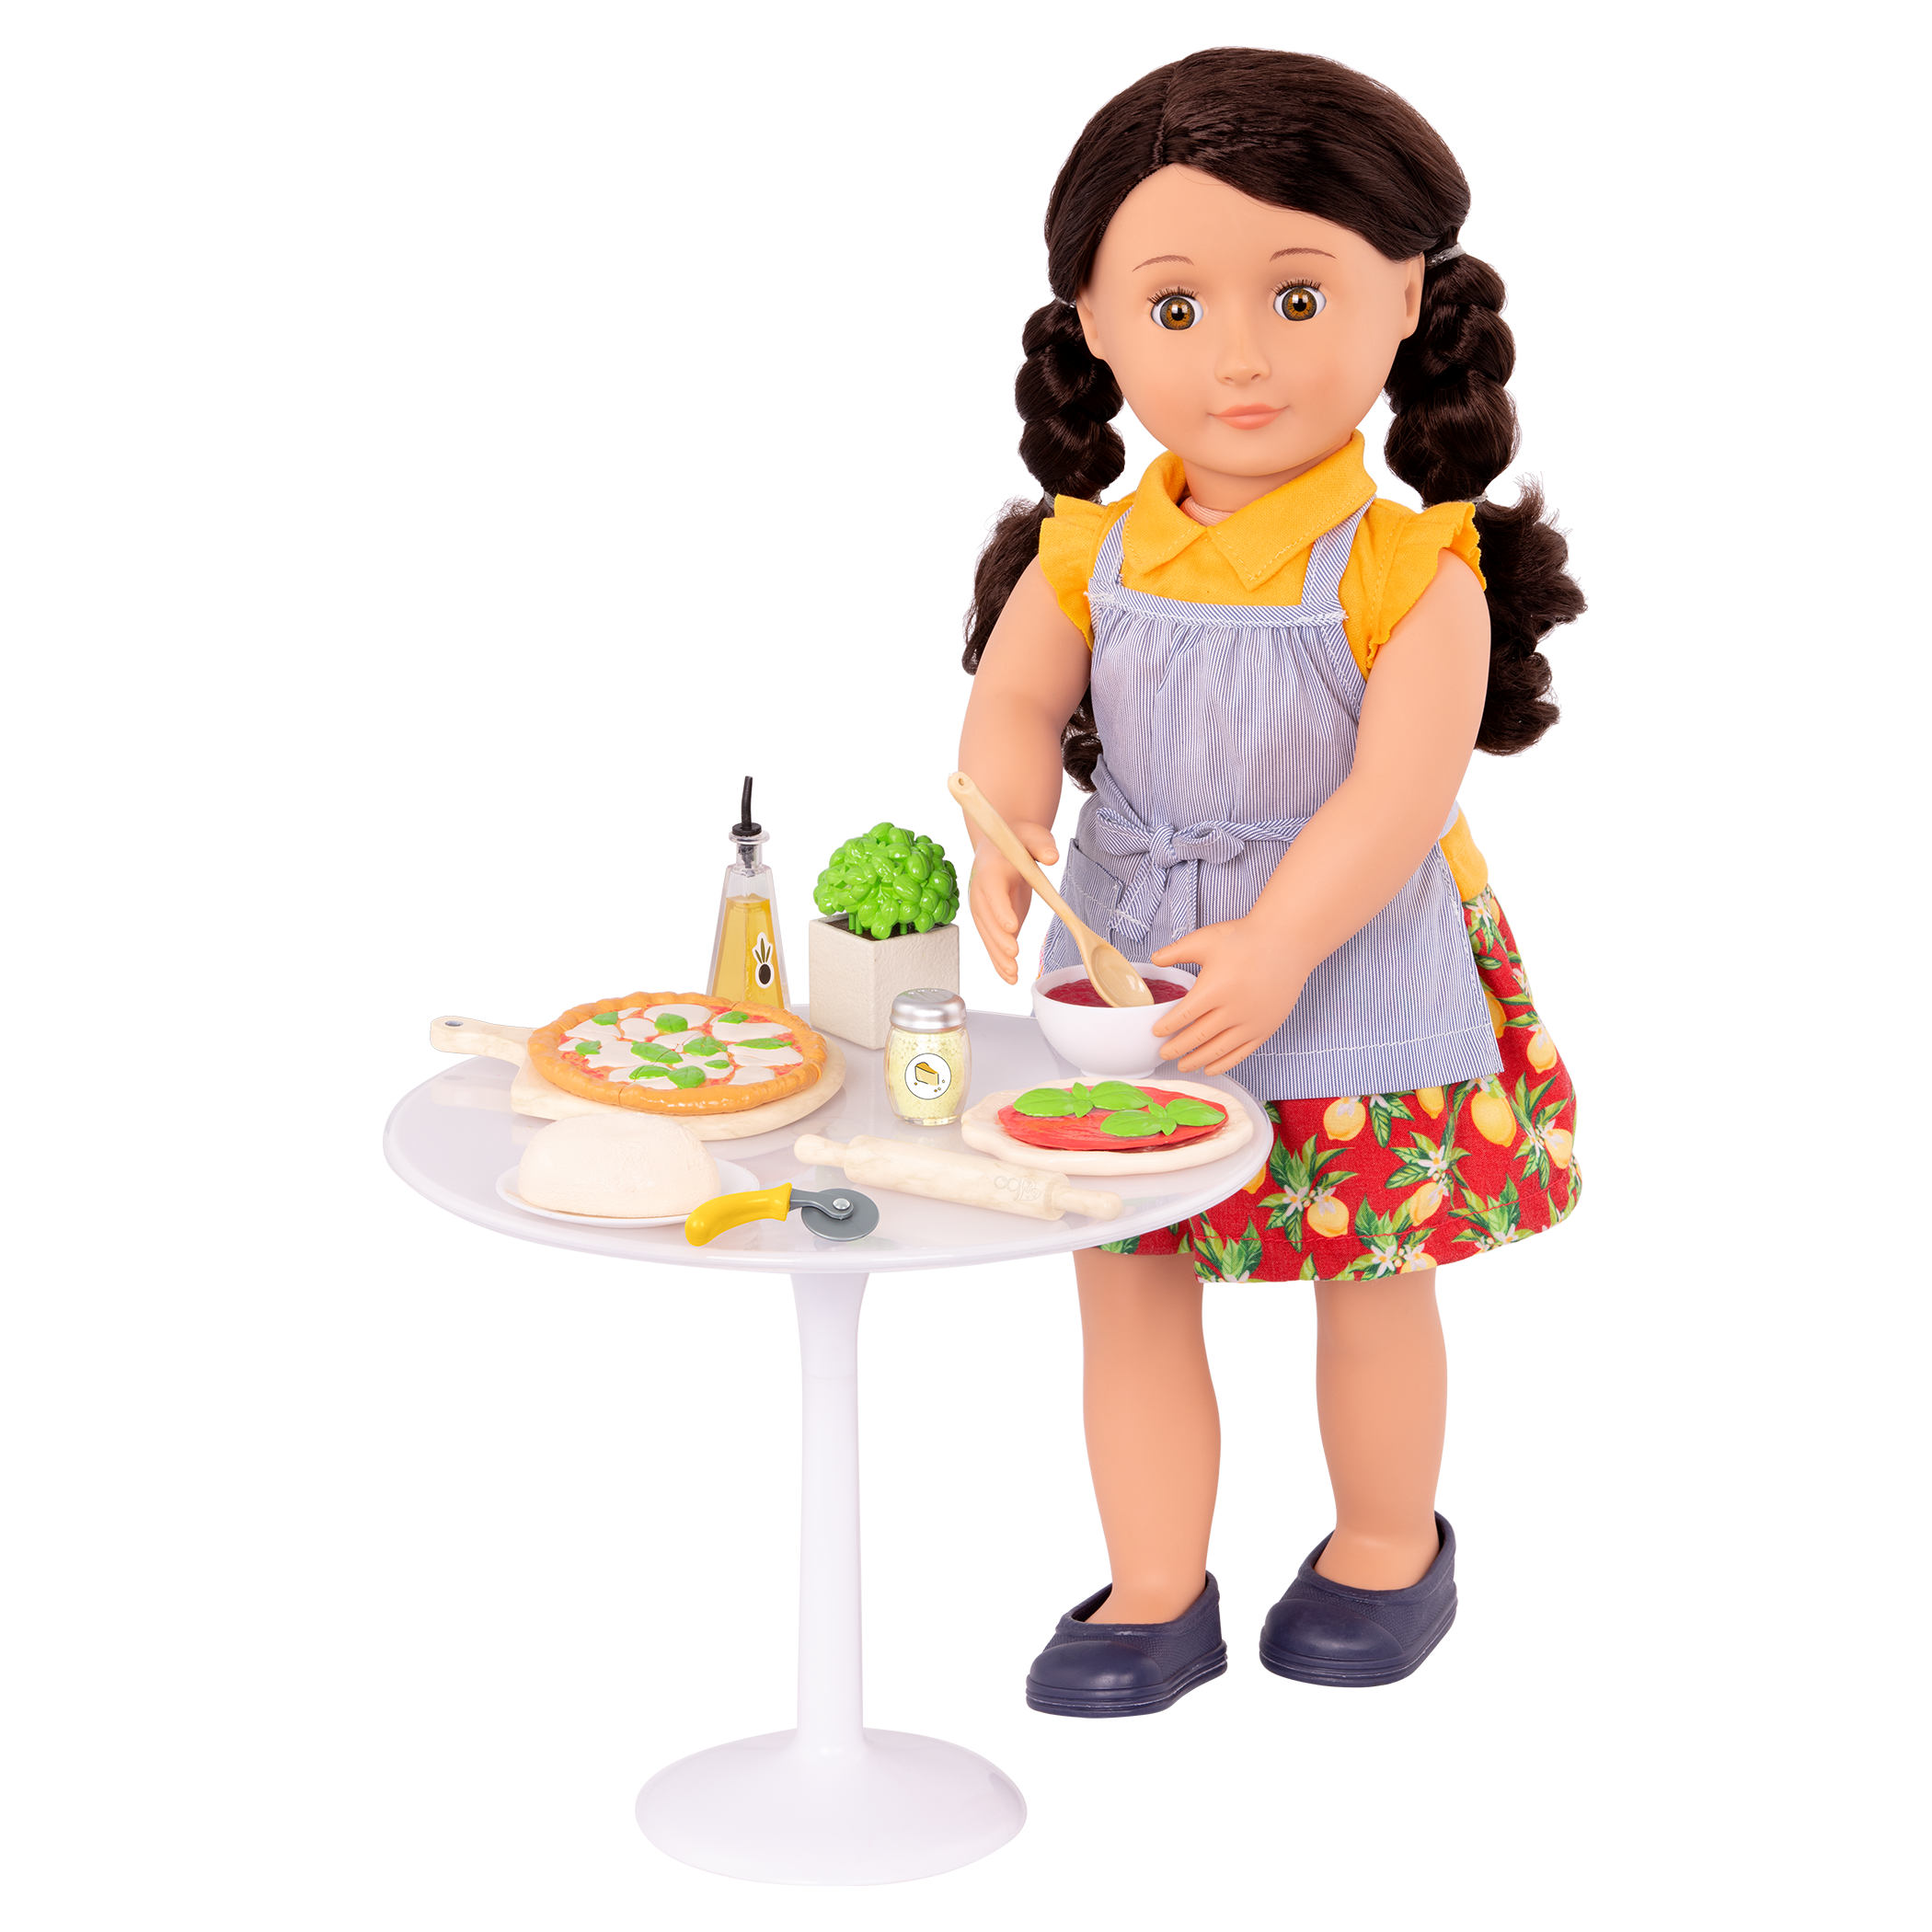 18-inch doll making a pizza